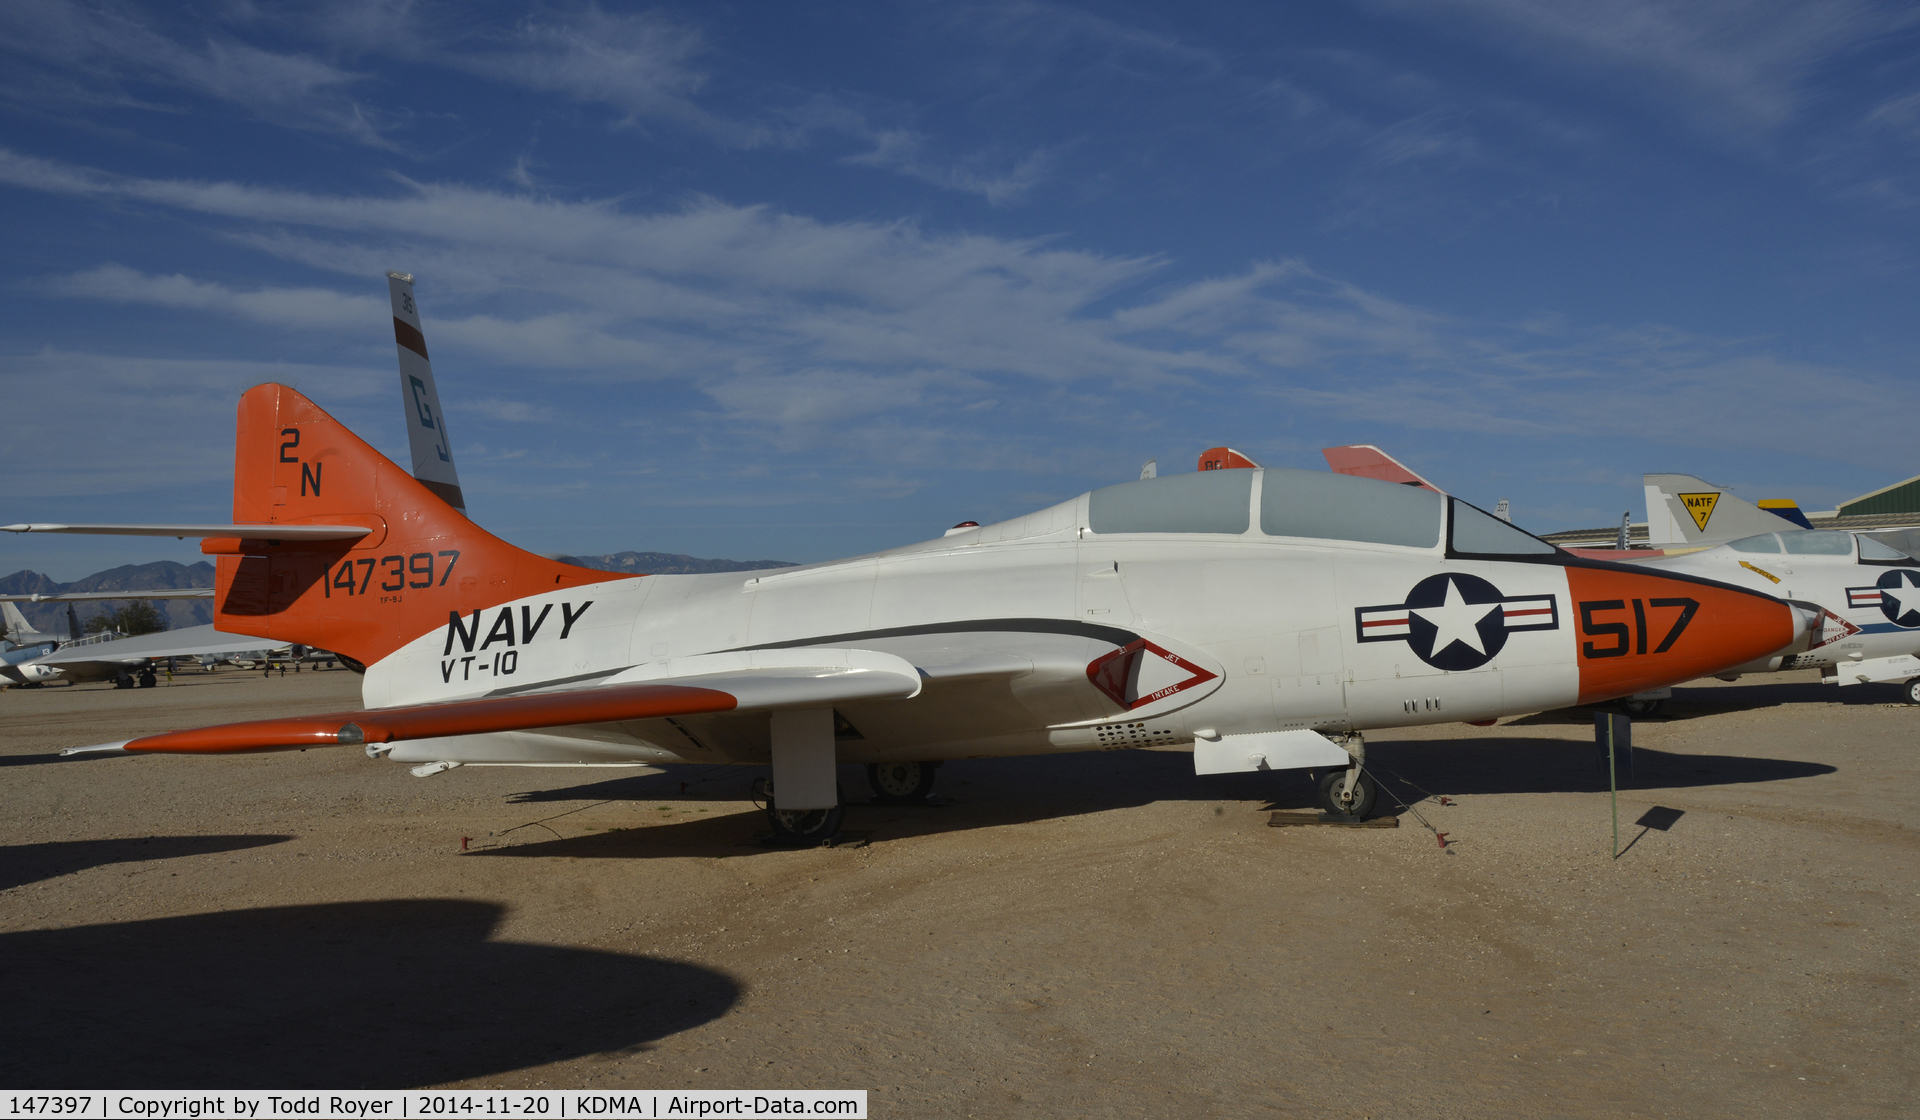 147397, 1962 Grumman TF-9J Cougar C/N 367, On display at the Pima Air and Space Museum